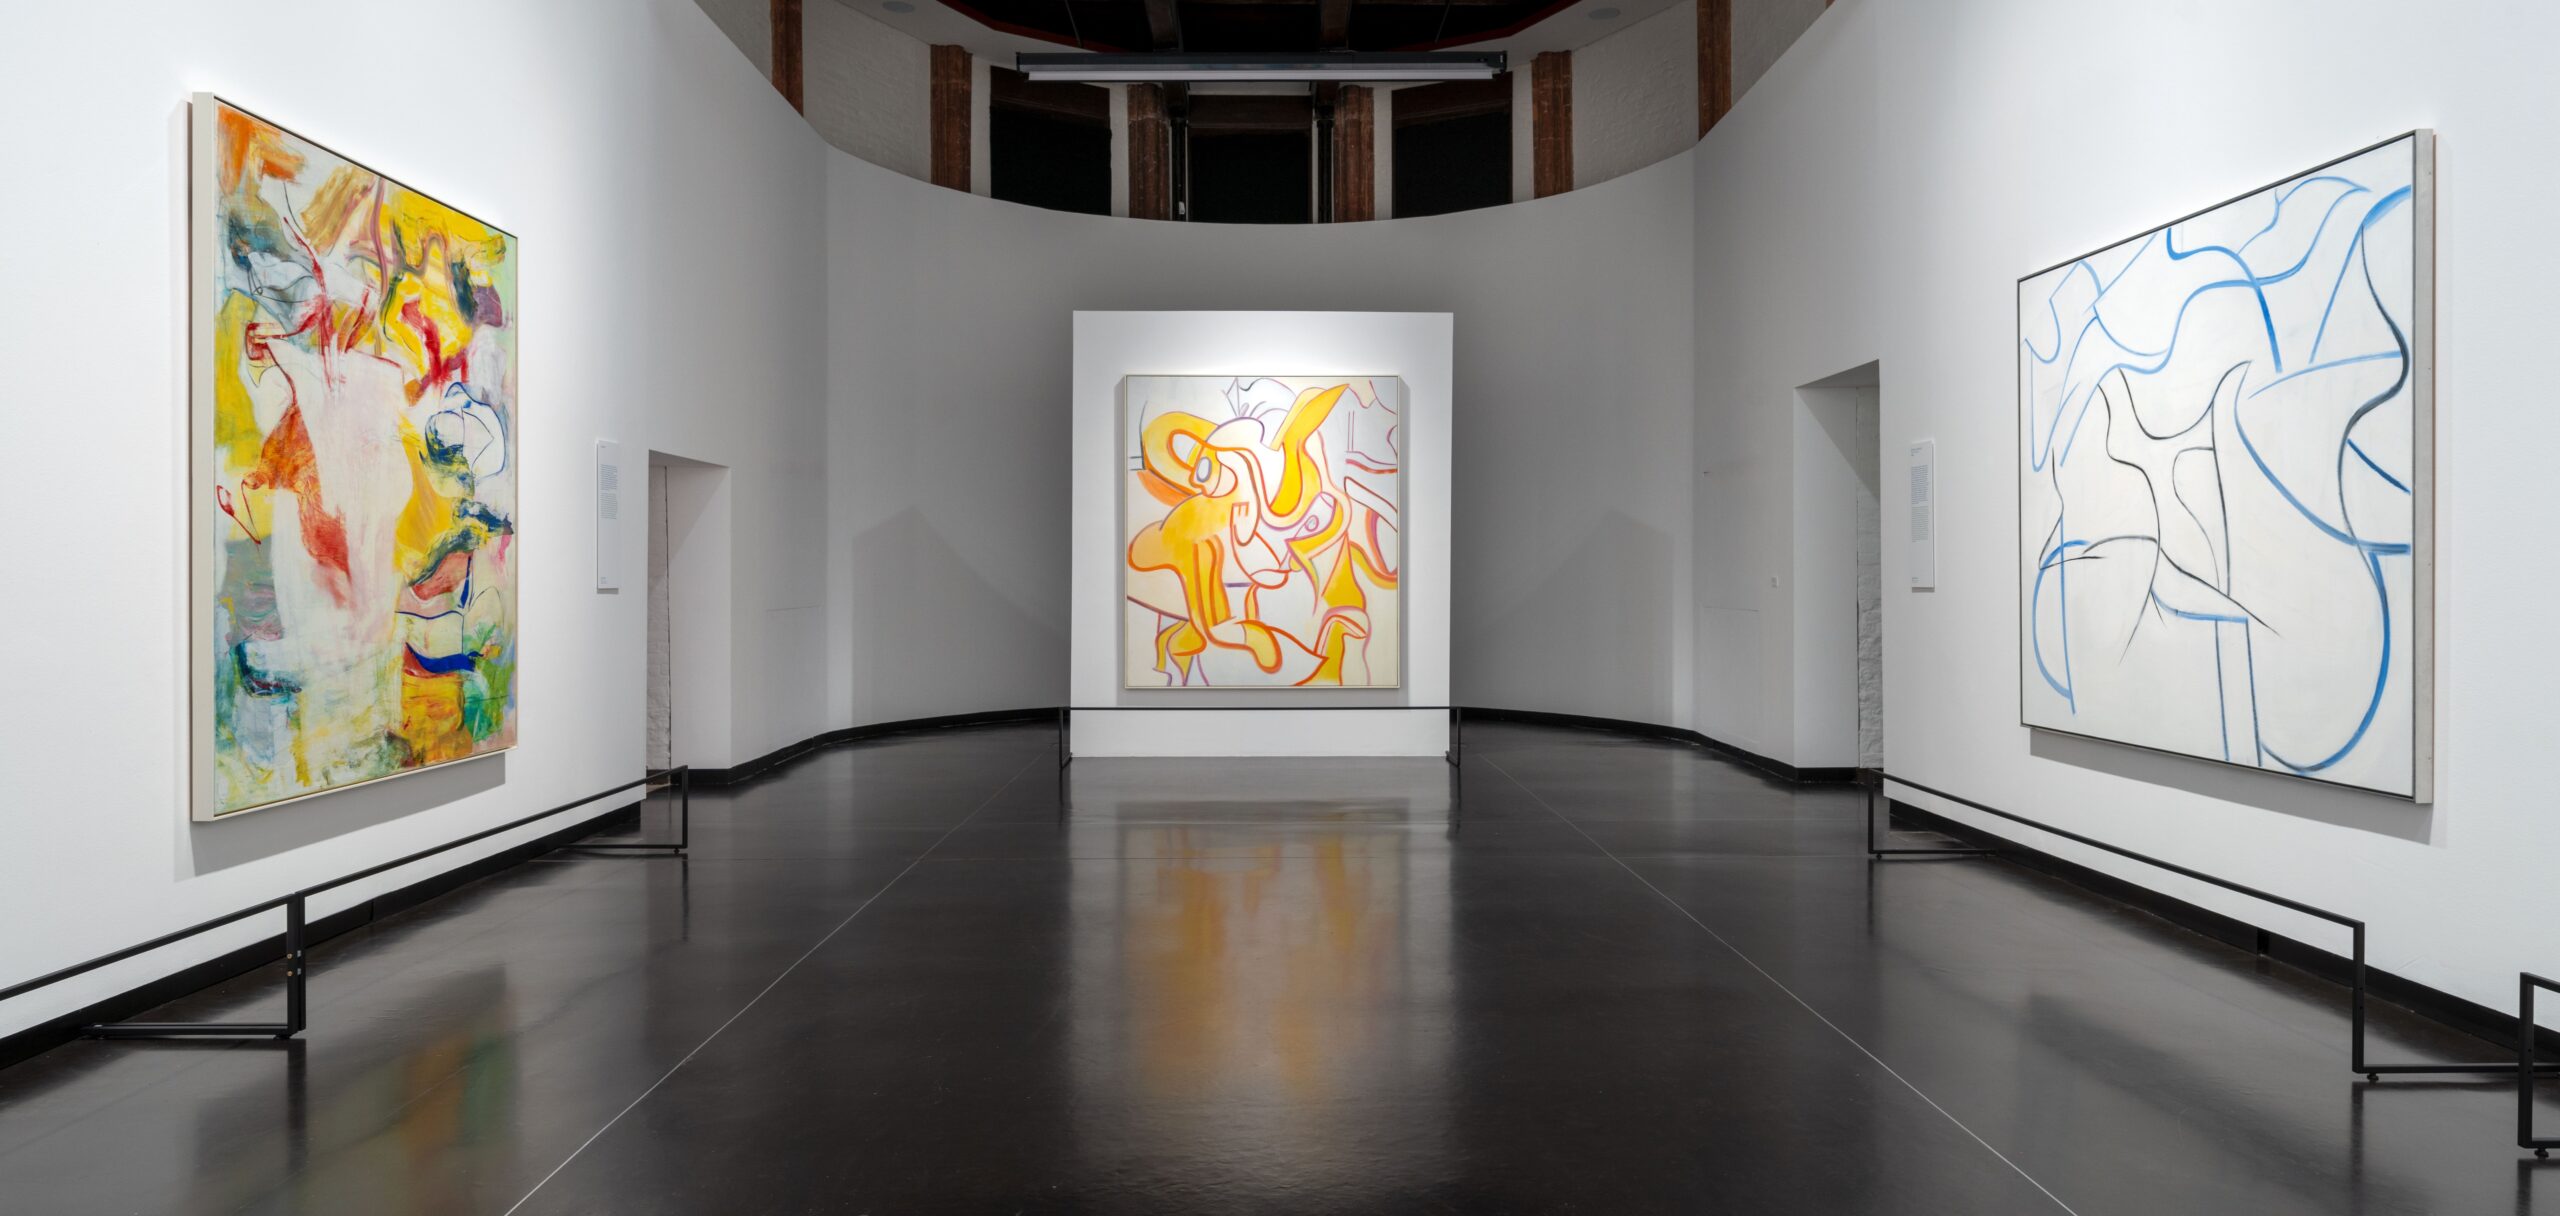 Installation View of Willem de Kooning and Italy, Gallerie dell’Accademia, Venice, 2024. Photograph by Matteo de Fina, 2024. © 2024 The Willem de Kooning Foundation, SIAE